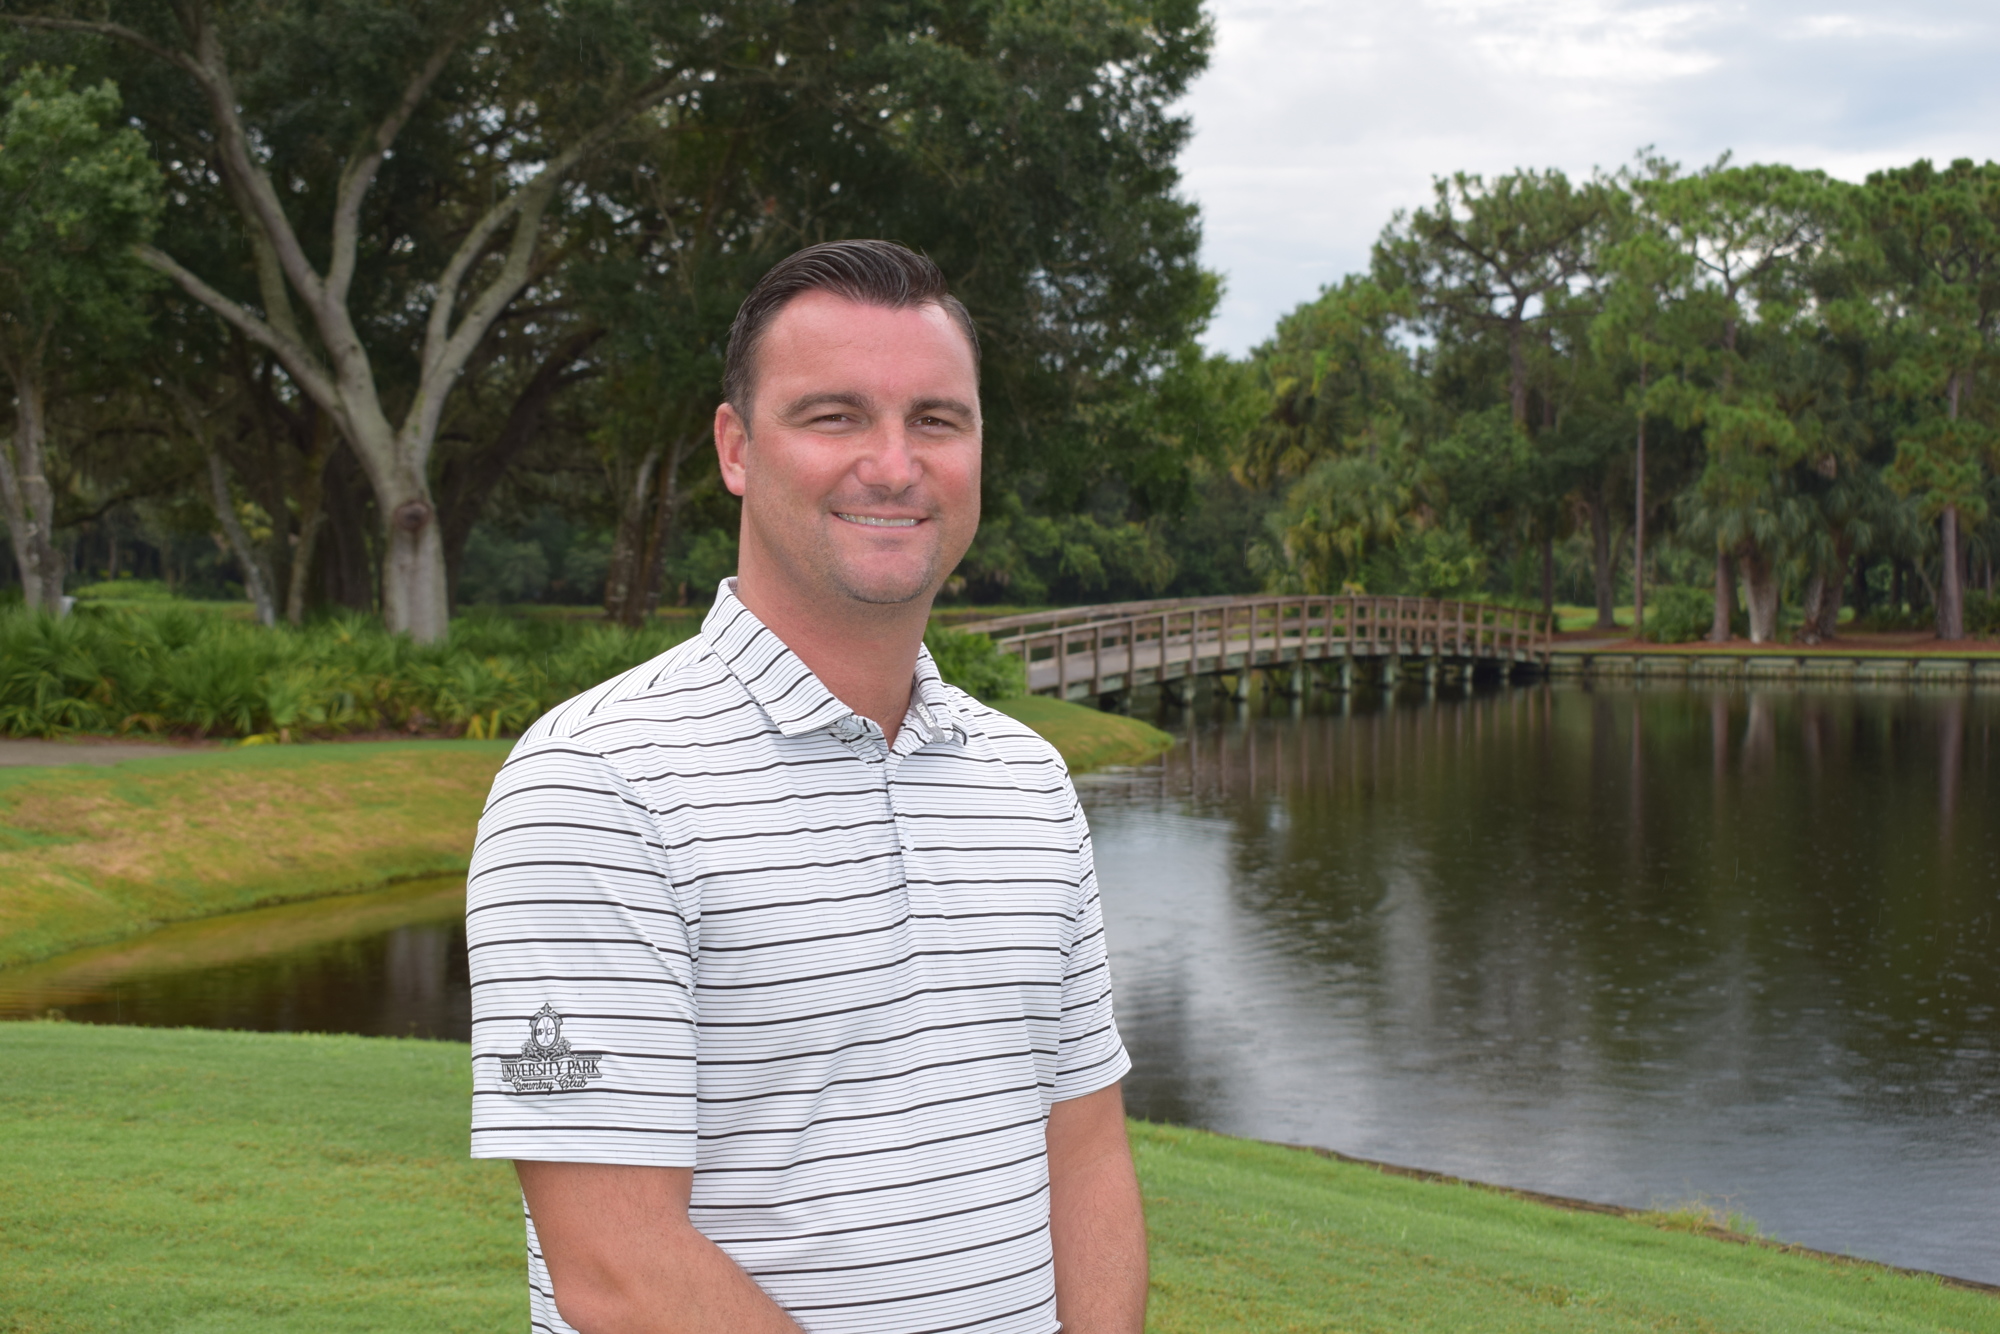 John Fetsick is the new general manager at University Park Country Club.